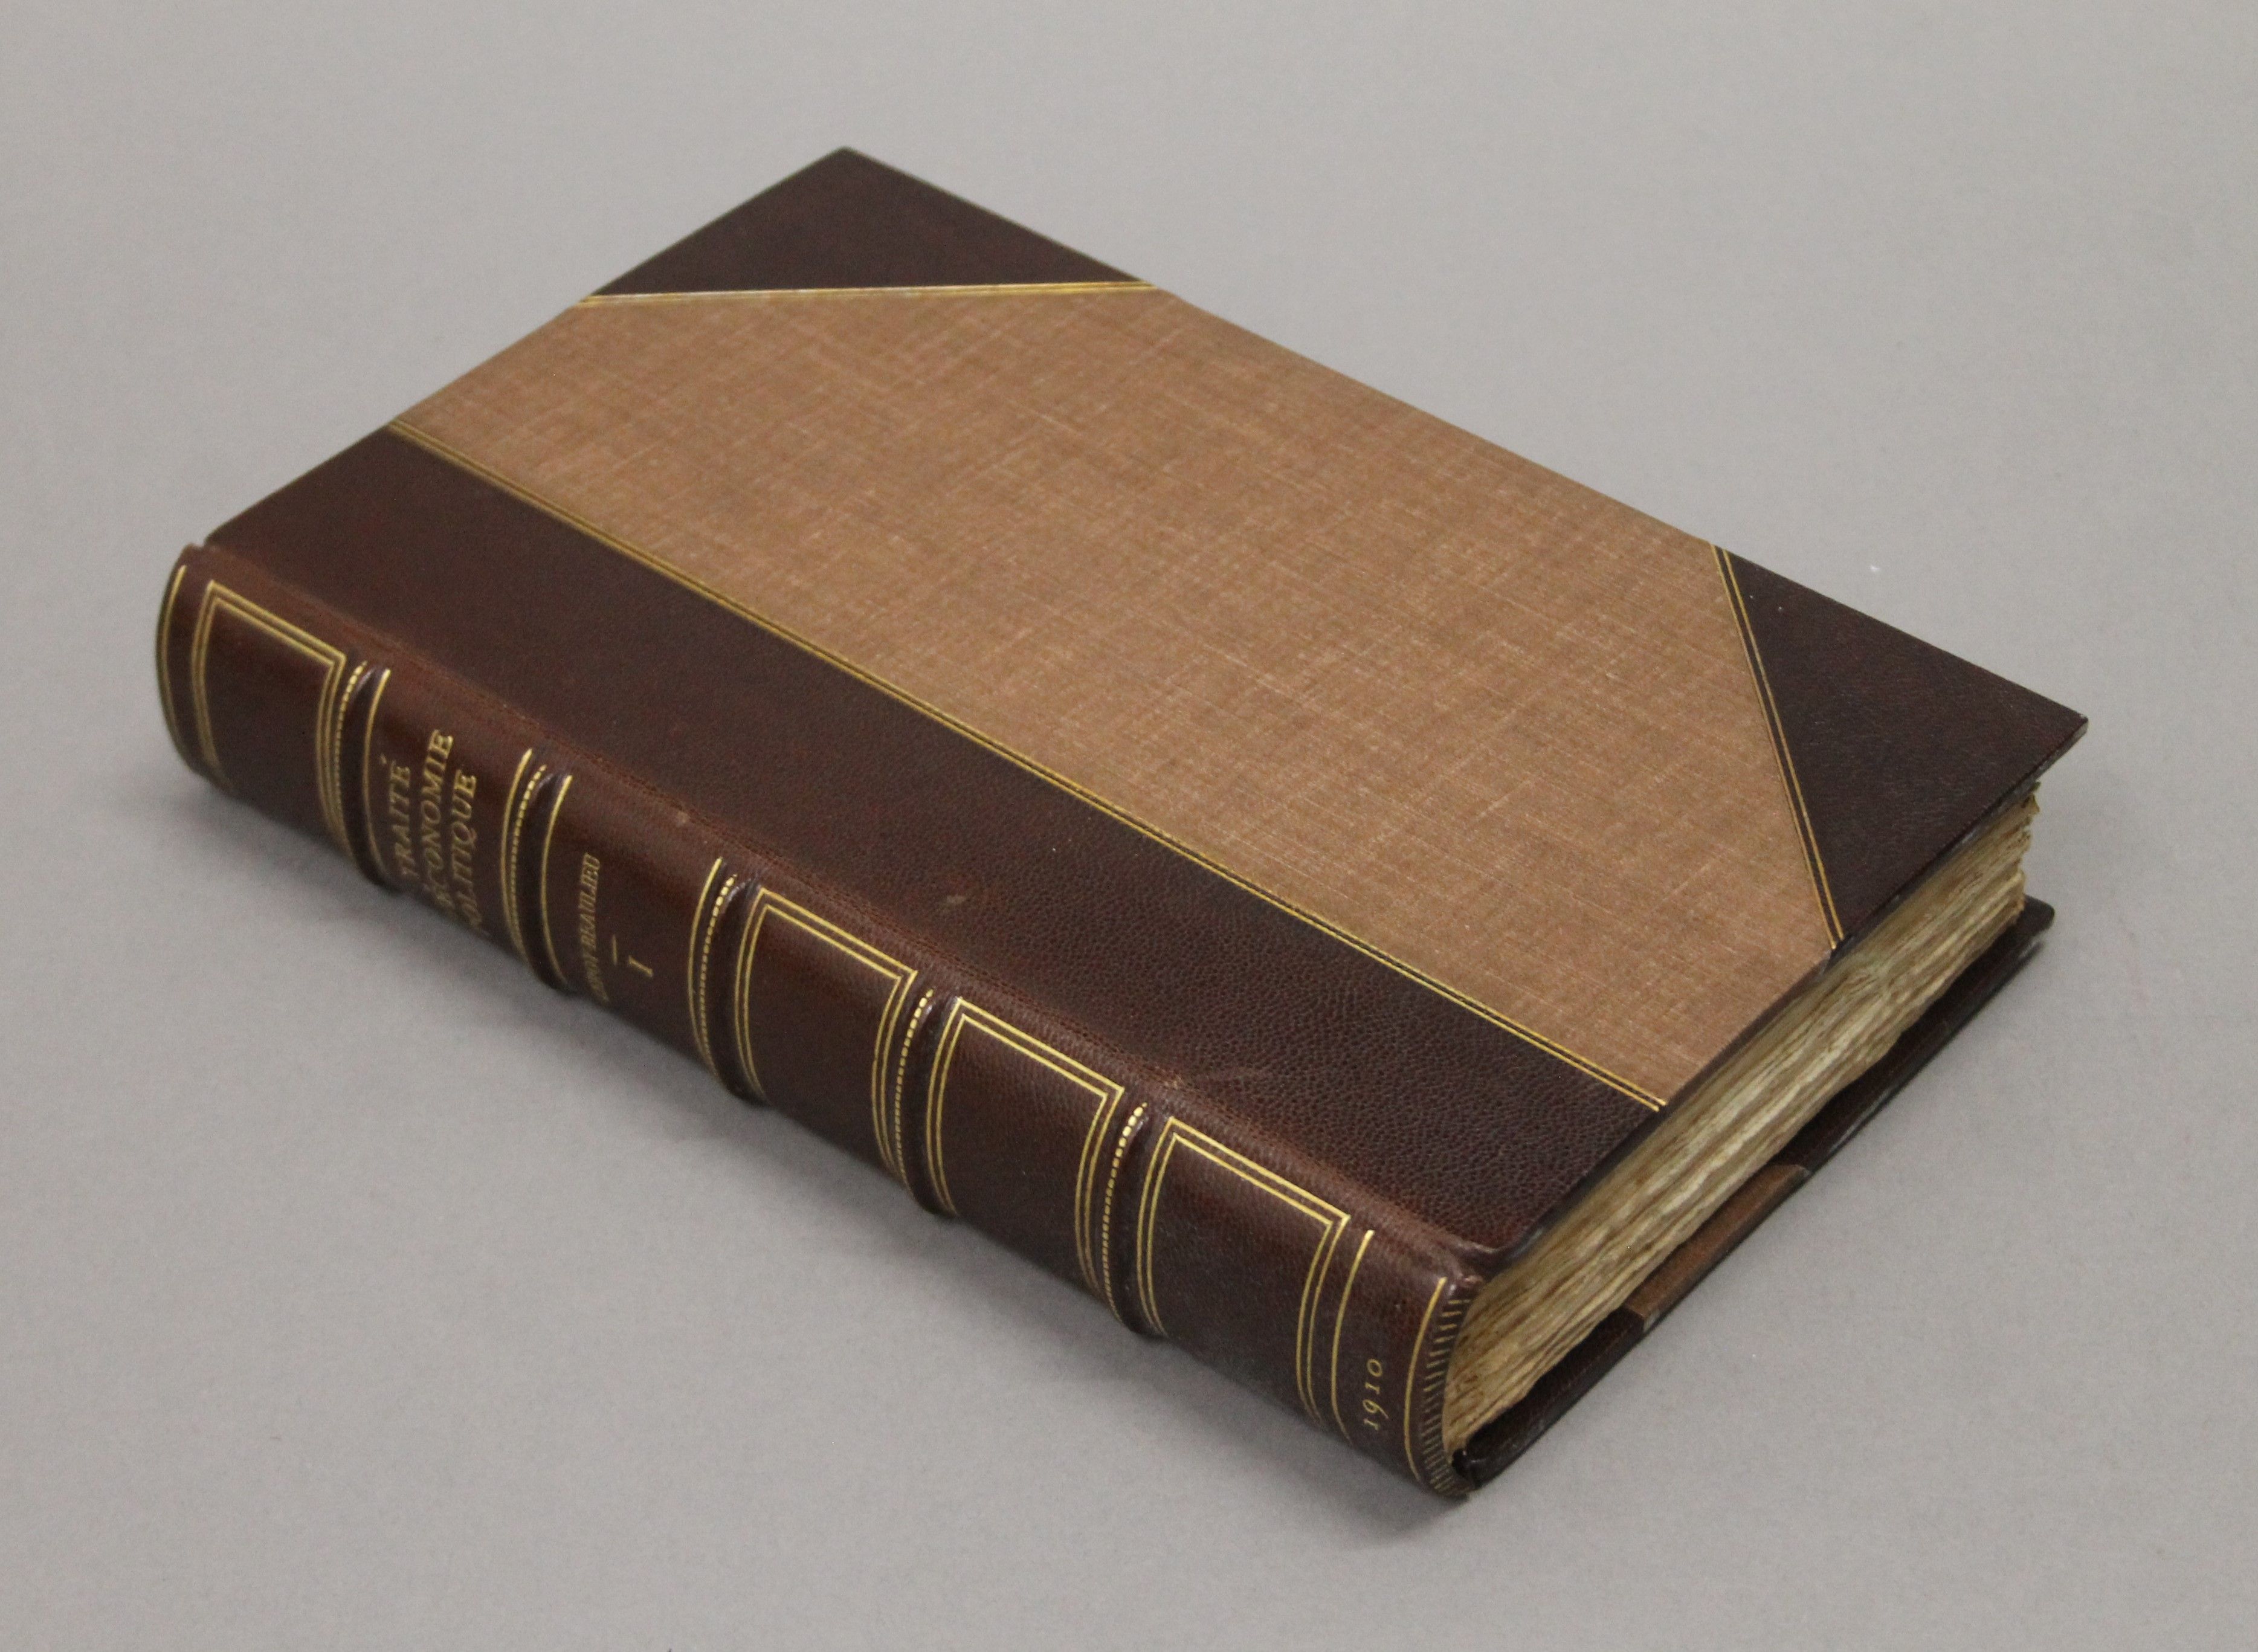 Goldsmith (Lewis), Statistics of France, first edition, - Image 7 of 11